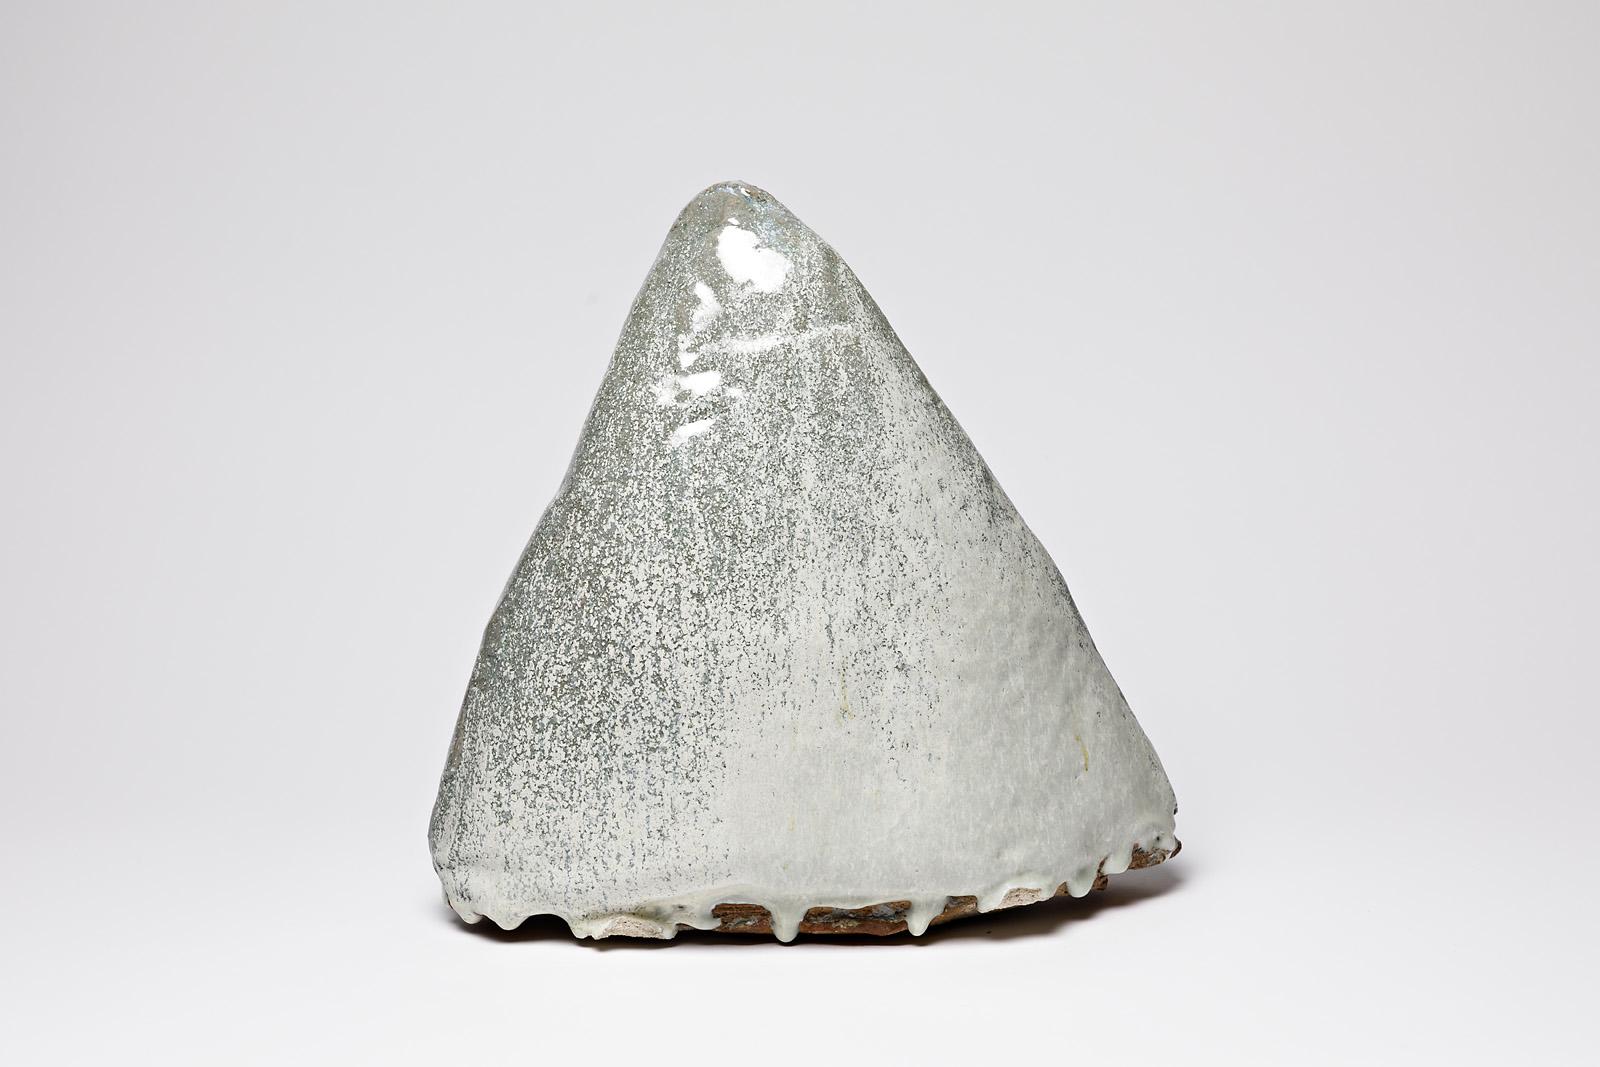 White and Grey Stoneware Ceramic Sculpture by Bernard Dejonghe Contemporary Art For Sale 2